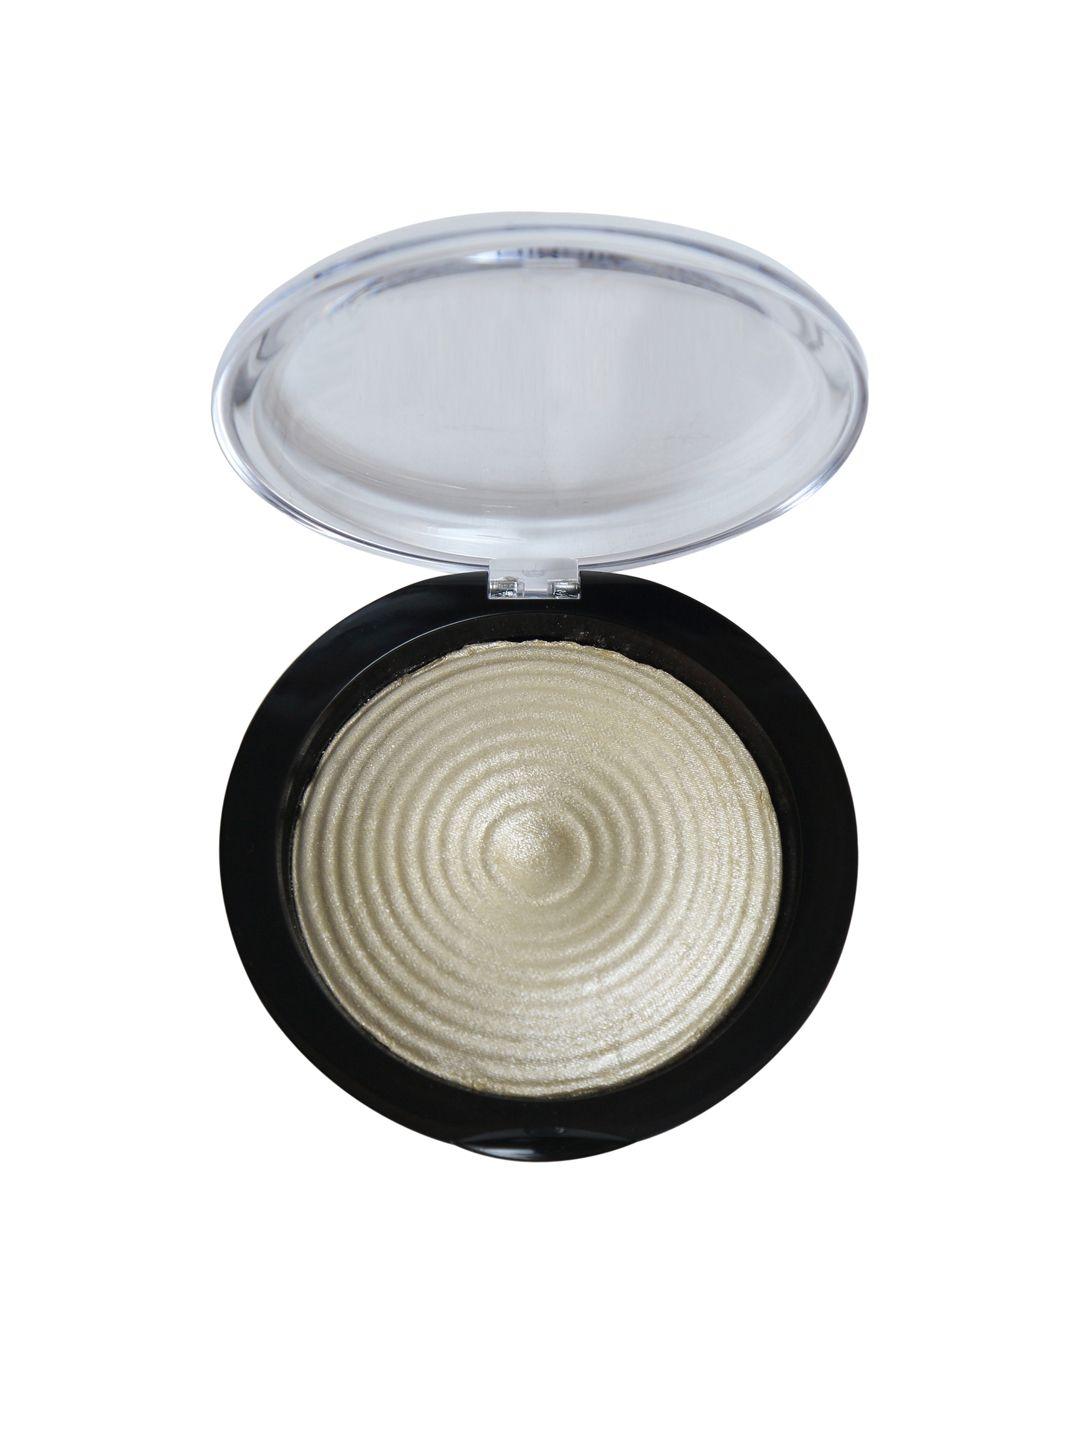 miss-claire-05-baked-highlighter-8-g